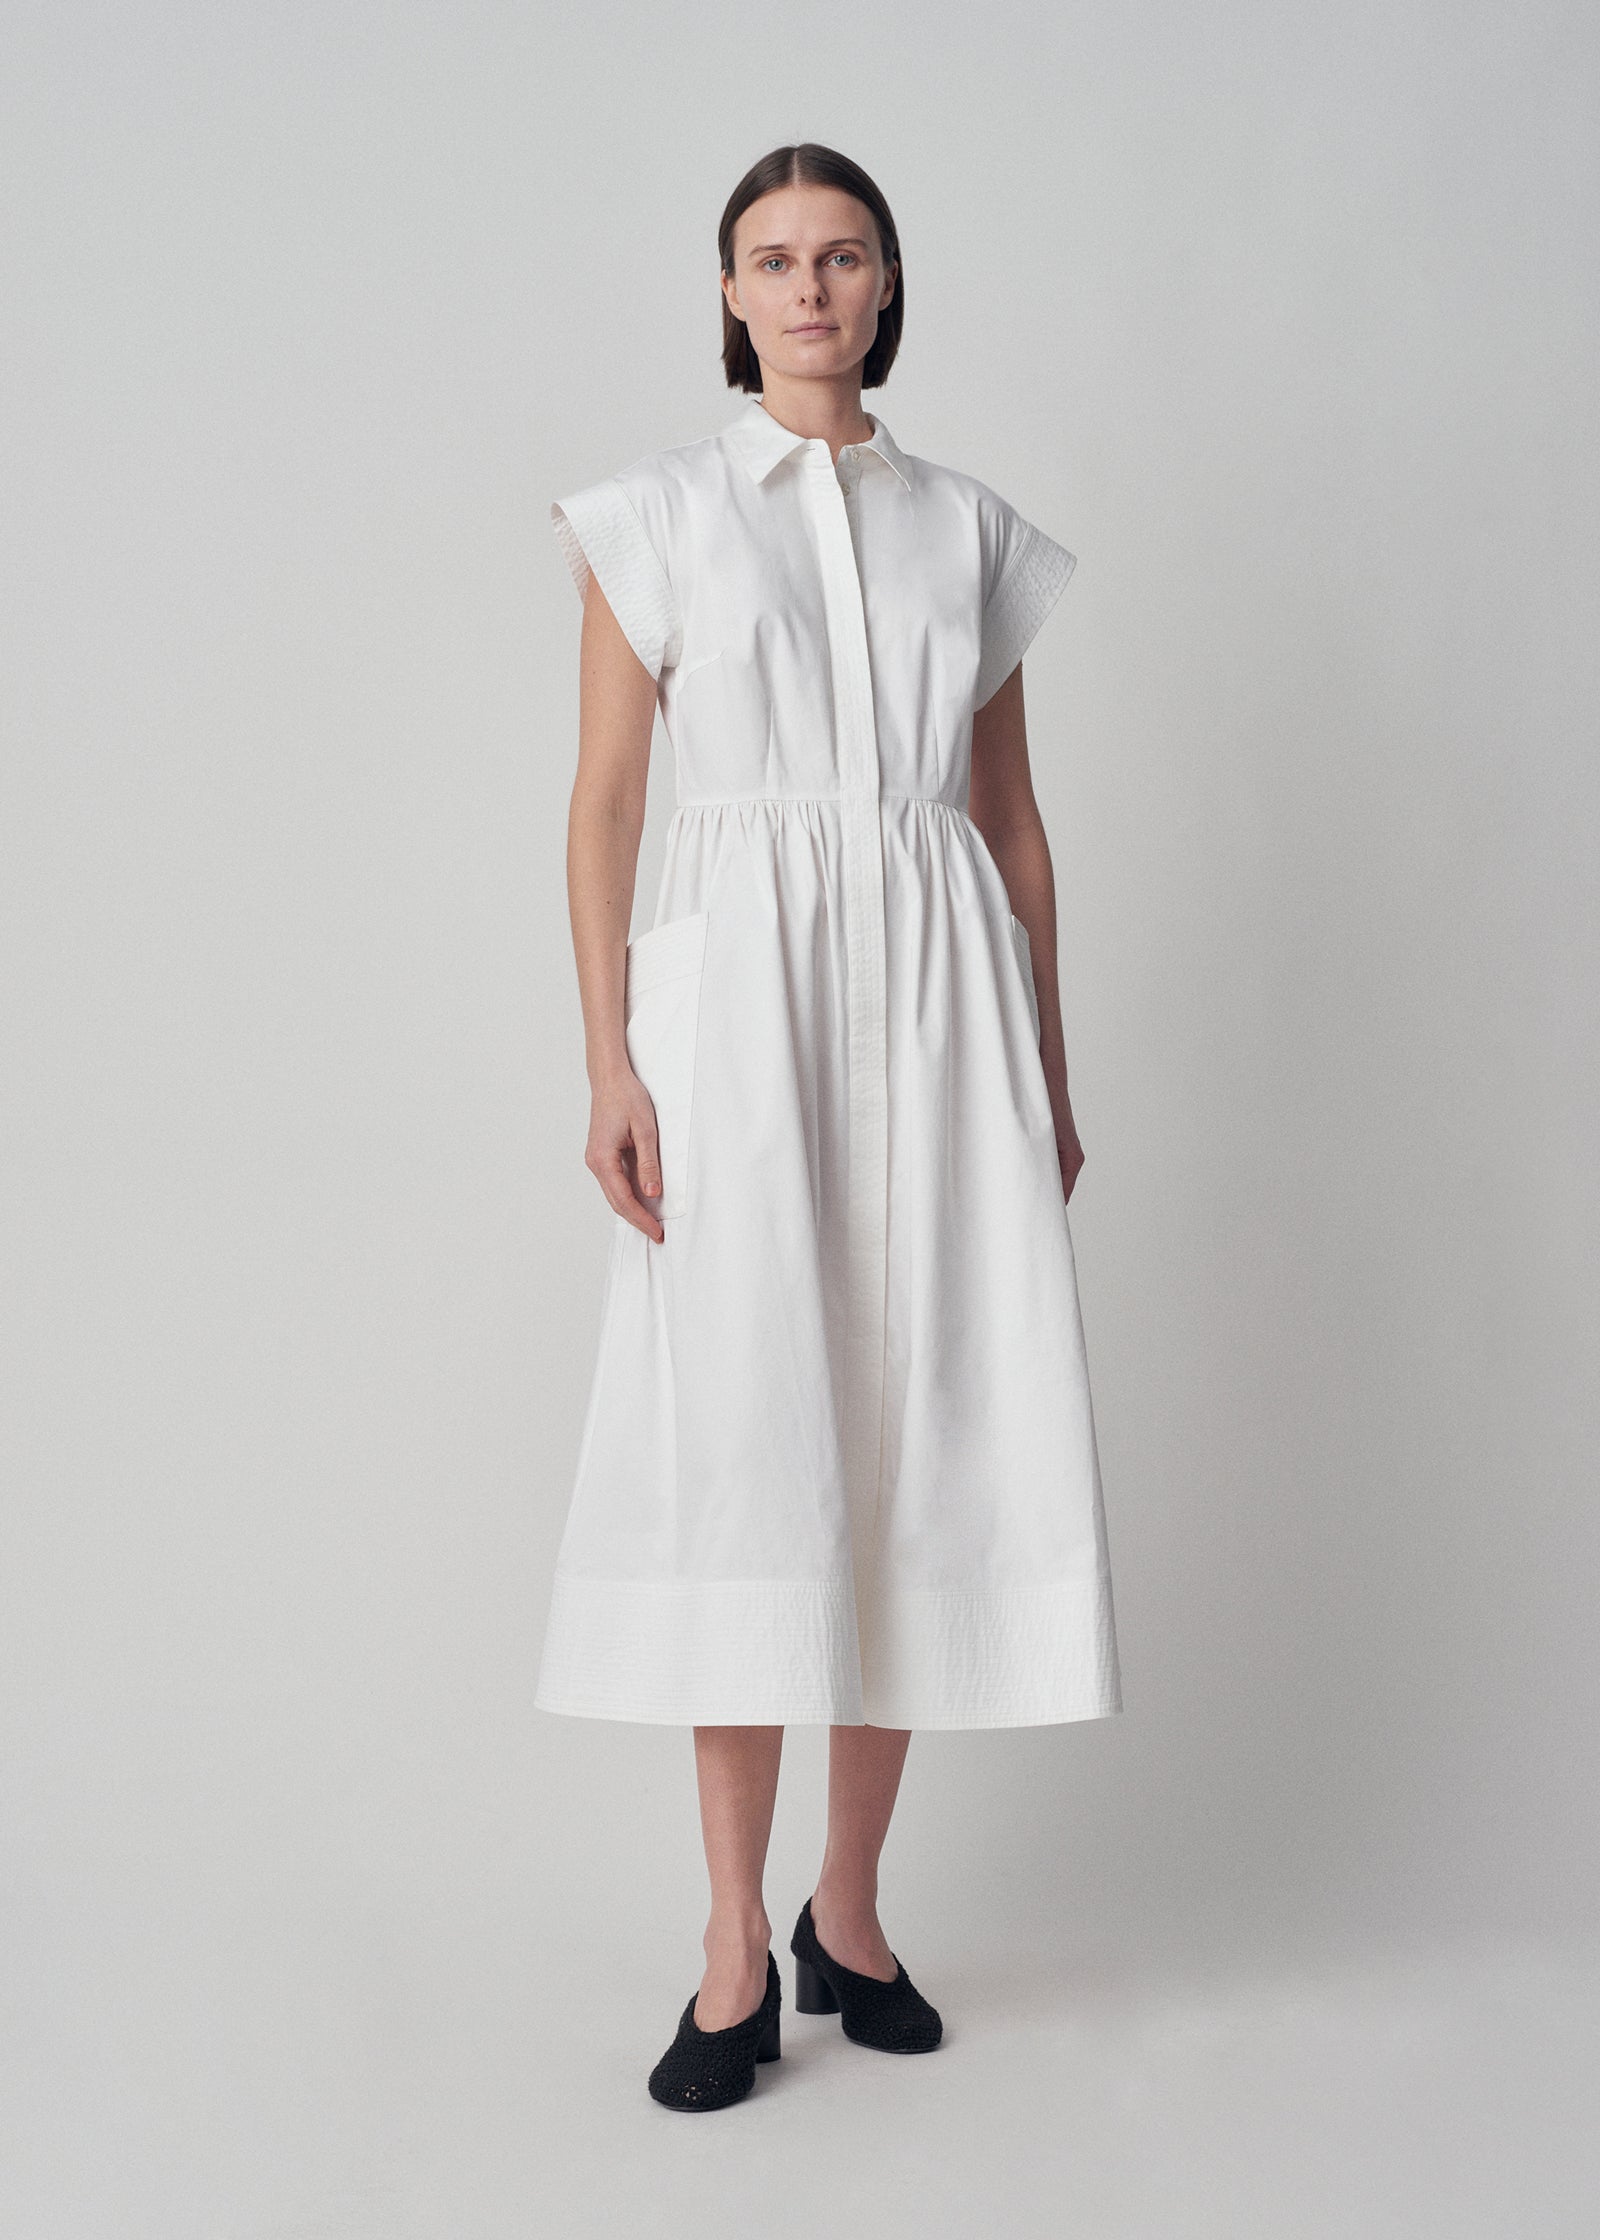 Cap Sleeve Dress in Cotton Poplin - White - CO Collections